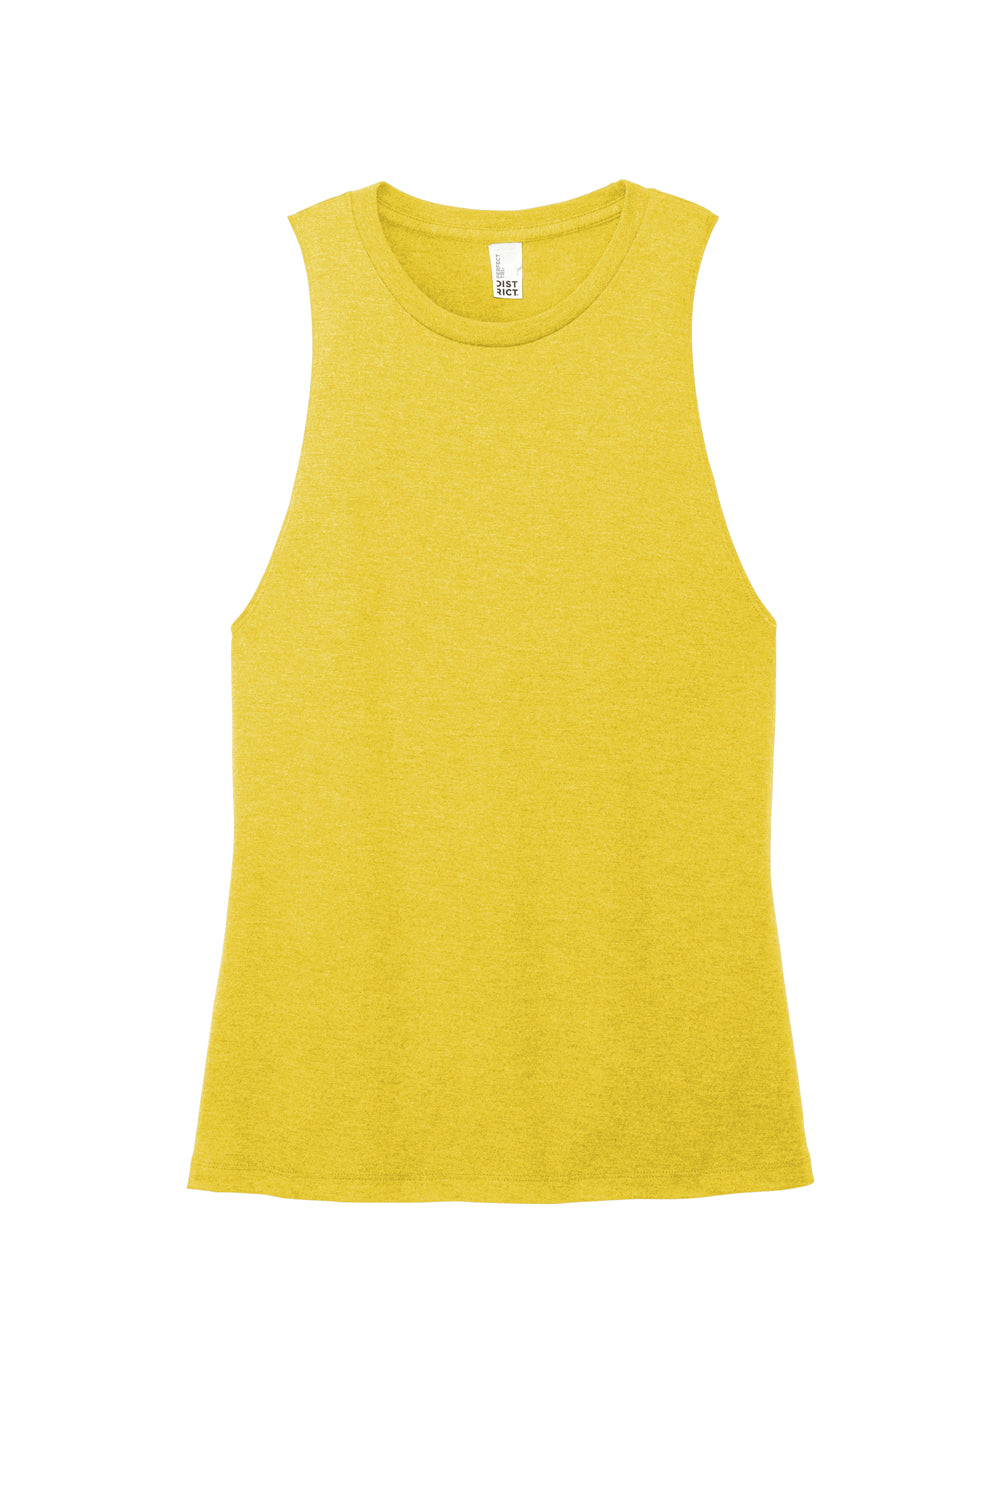 District DT153 Womens Perfect Tri Muscle Tank Top Heather Ochre Yellow Flat Front